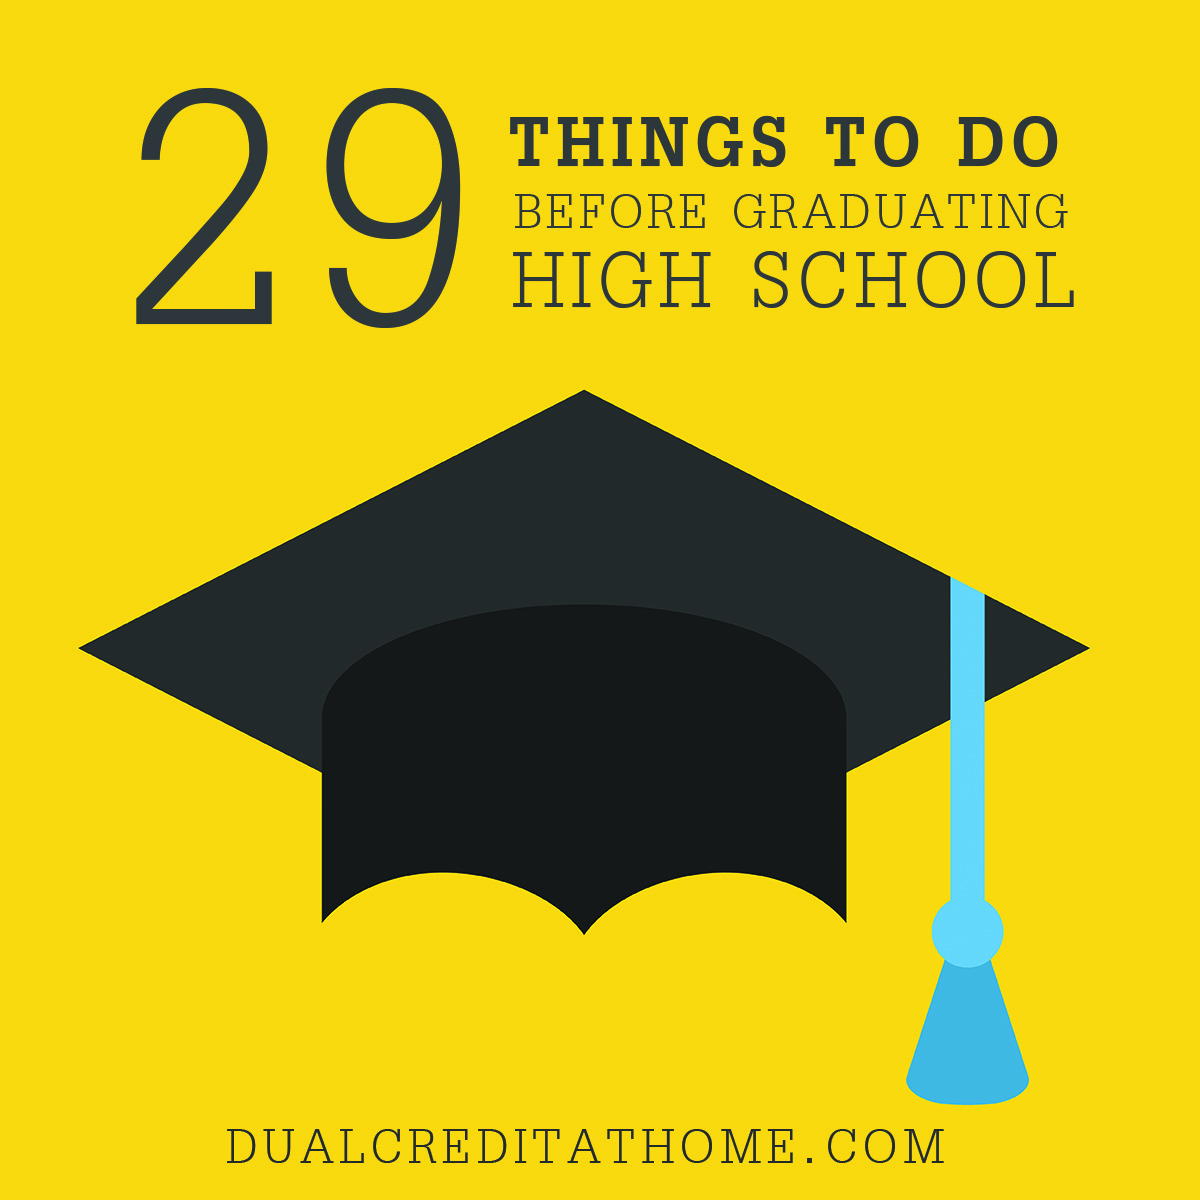 29 Things to Do Before Graduating High School